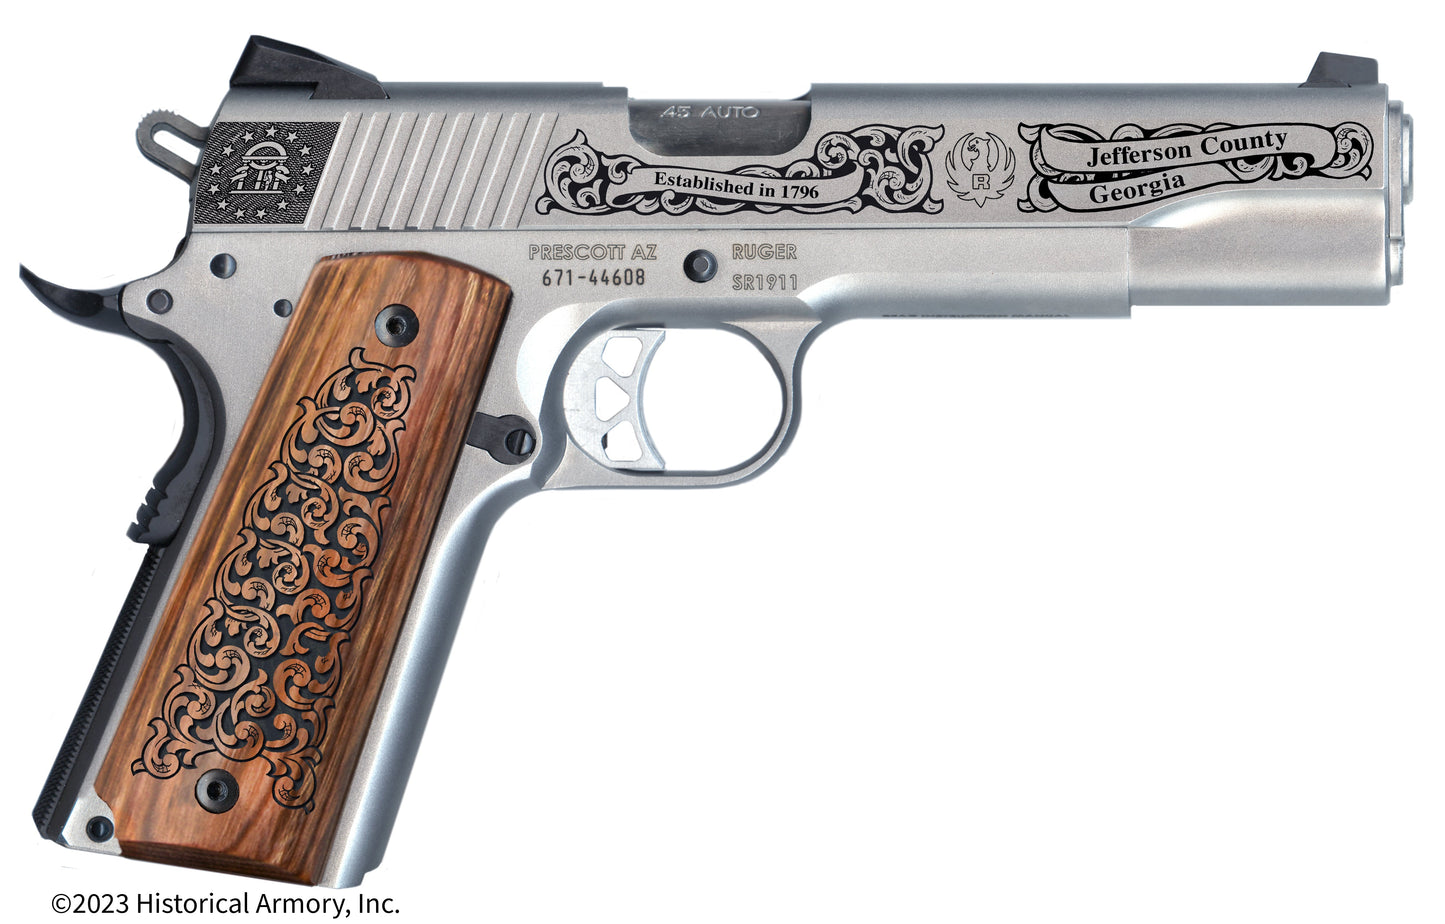 Jefferson County Georgia Engraved .45 Auto Ruger 1911